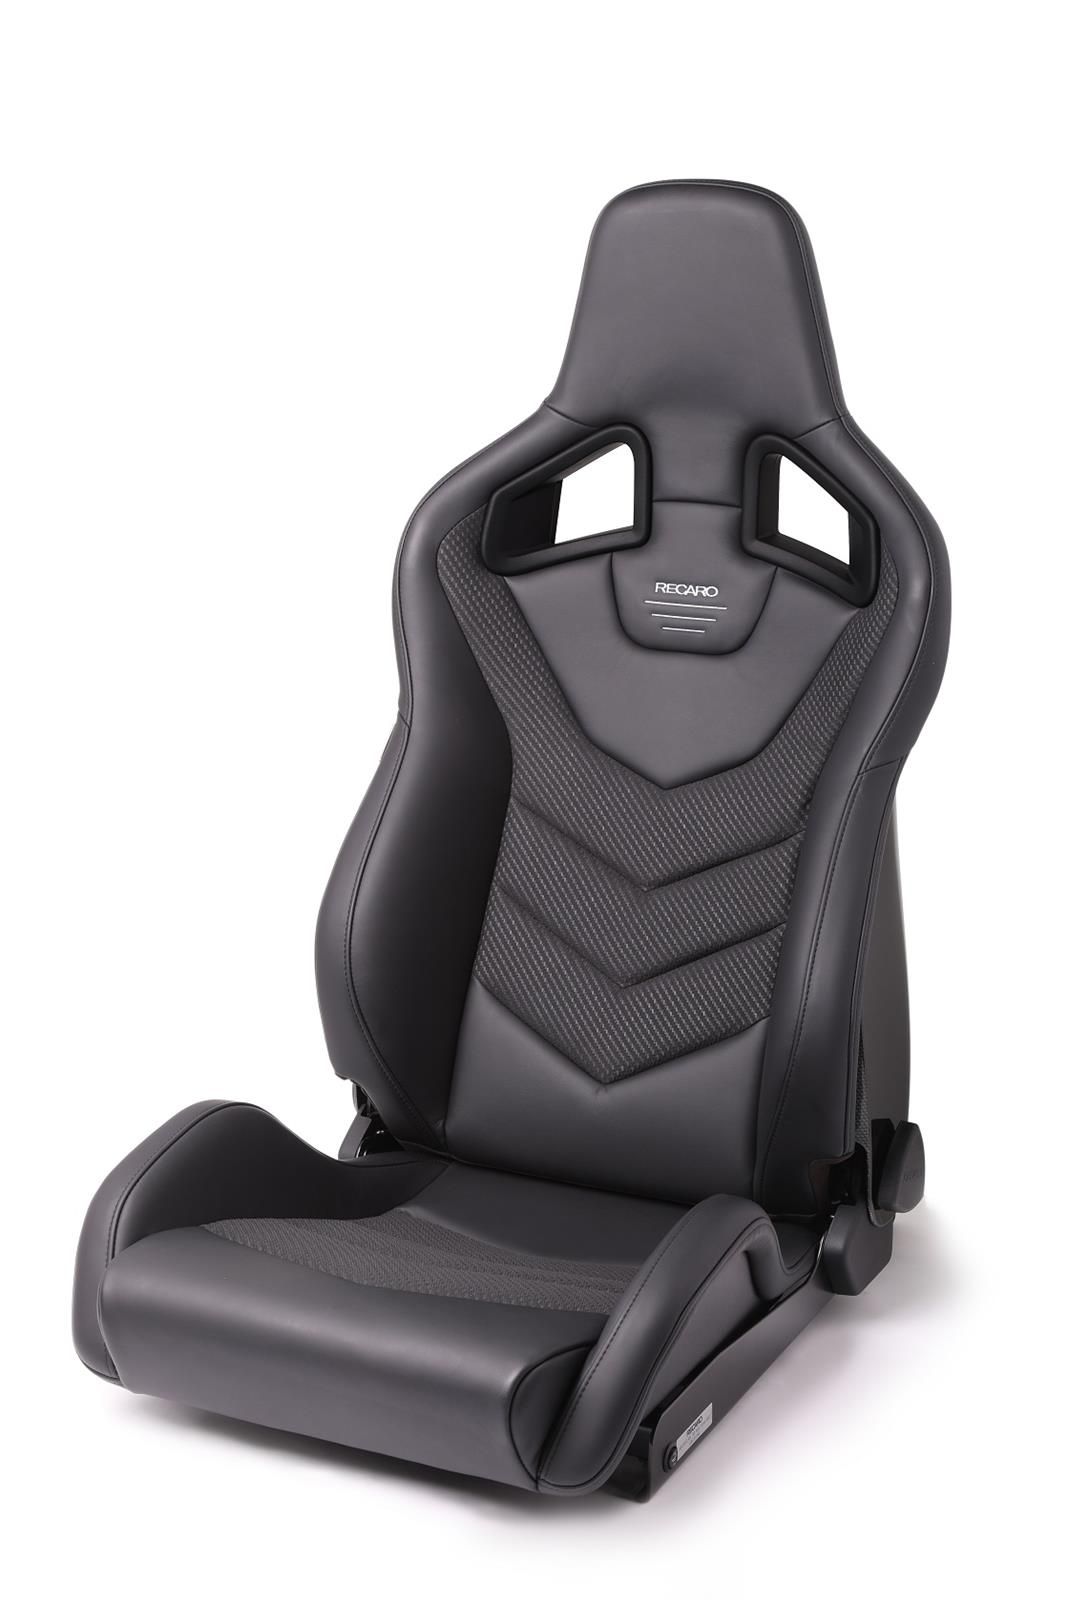 Recaro Sportster GT Driver Seat - Black Leather/Carbon Weave